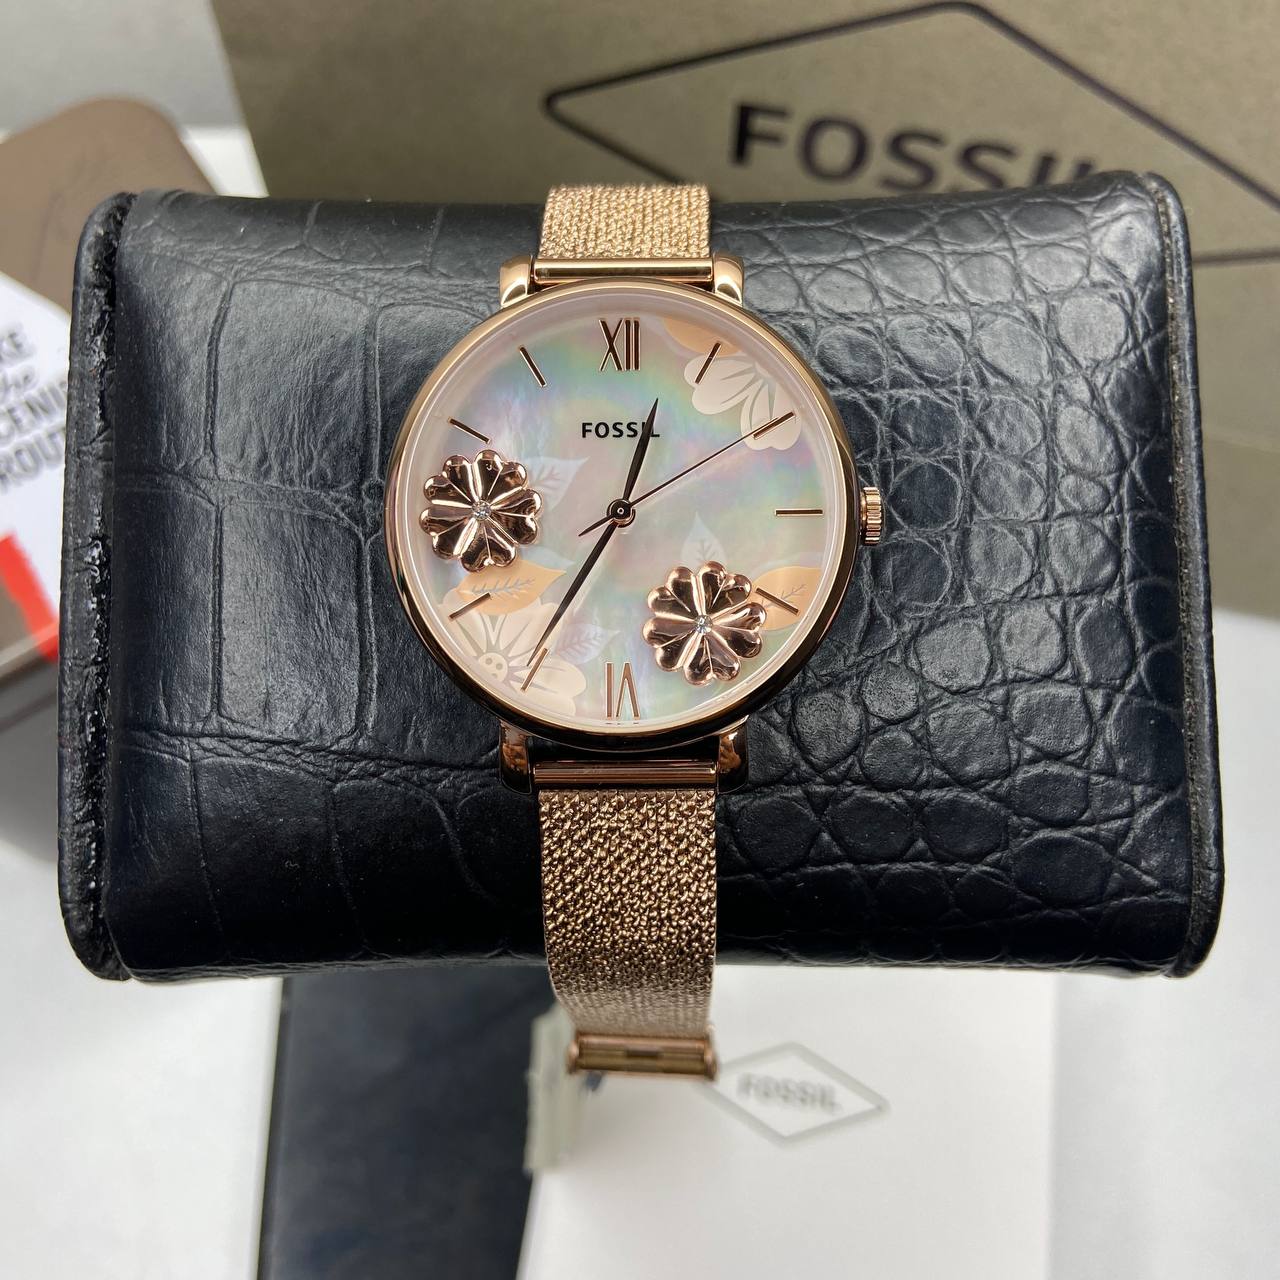 FOSSIL Women's Jacqueline Floral Rosegold Tone Watch ES4534